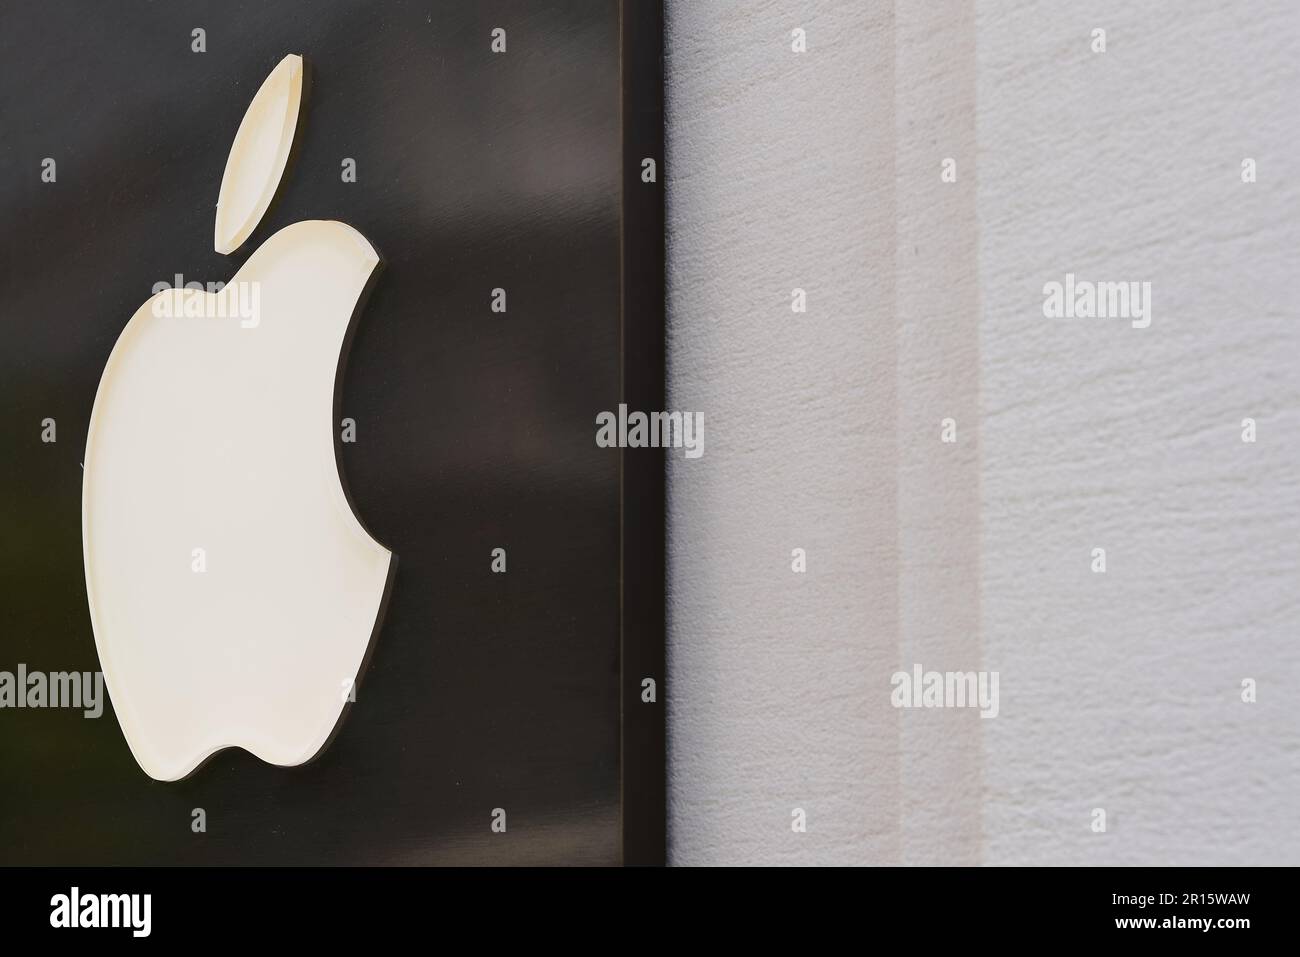 Apple company logo on an Apple store in downtown Vienna, Austria with text space on the right side Stock Photo